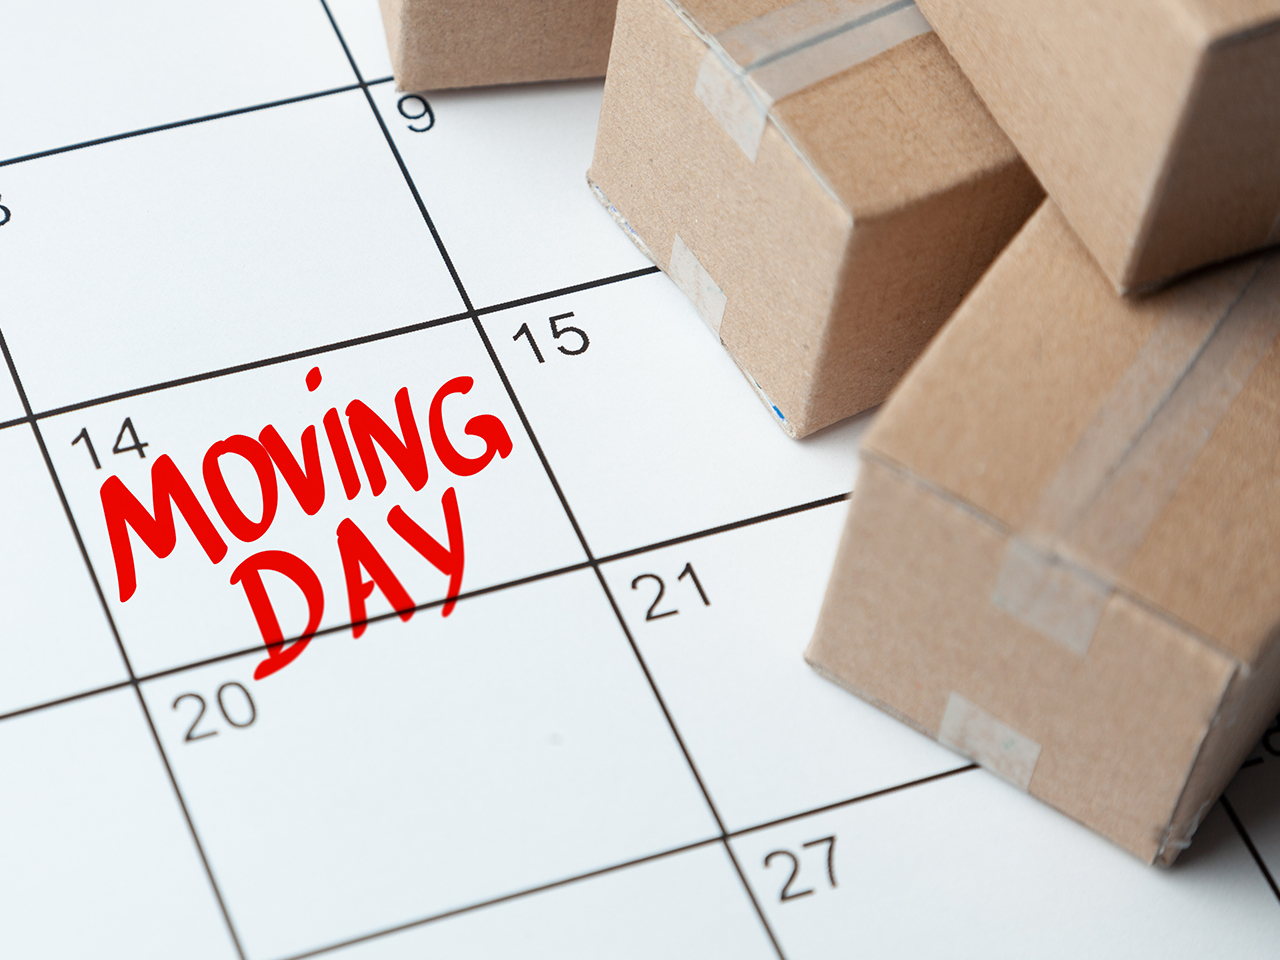 https://apmortgagesolutions.co.uk/wp-content/uploads/2021/07/moving-day-1.jpg